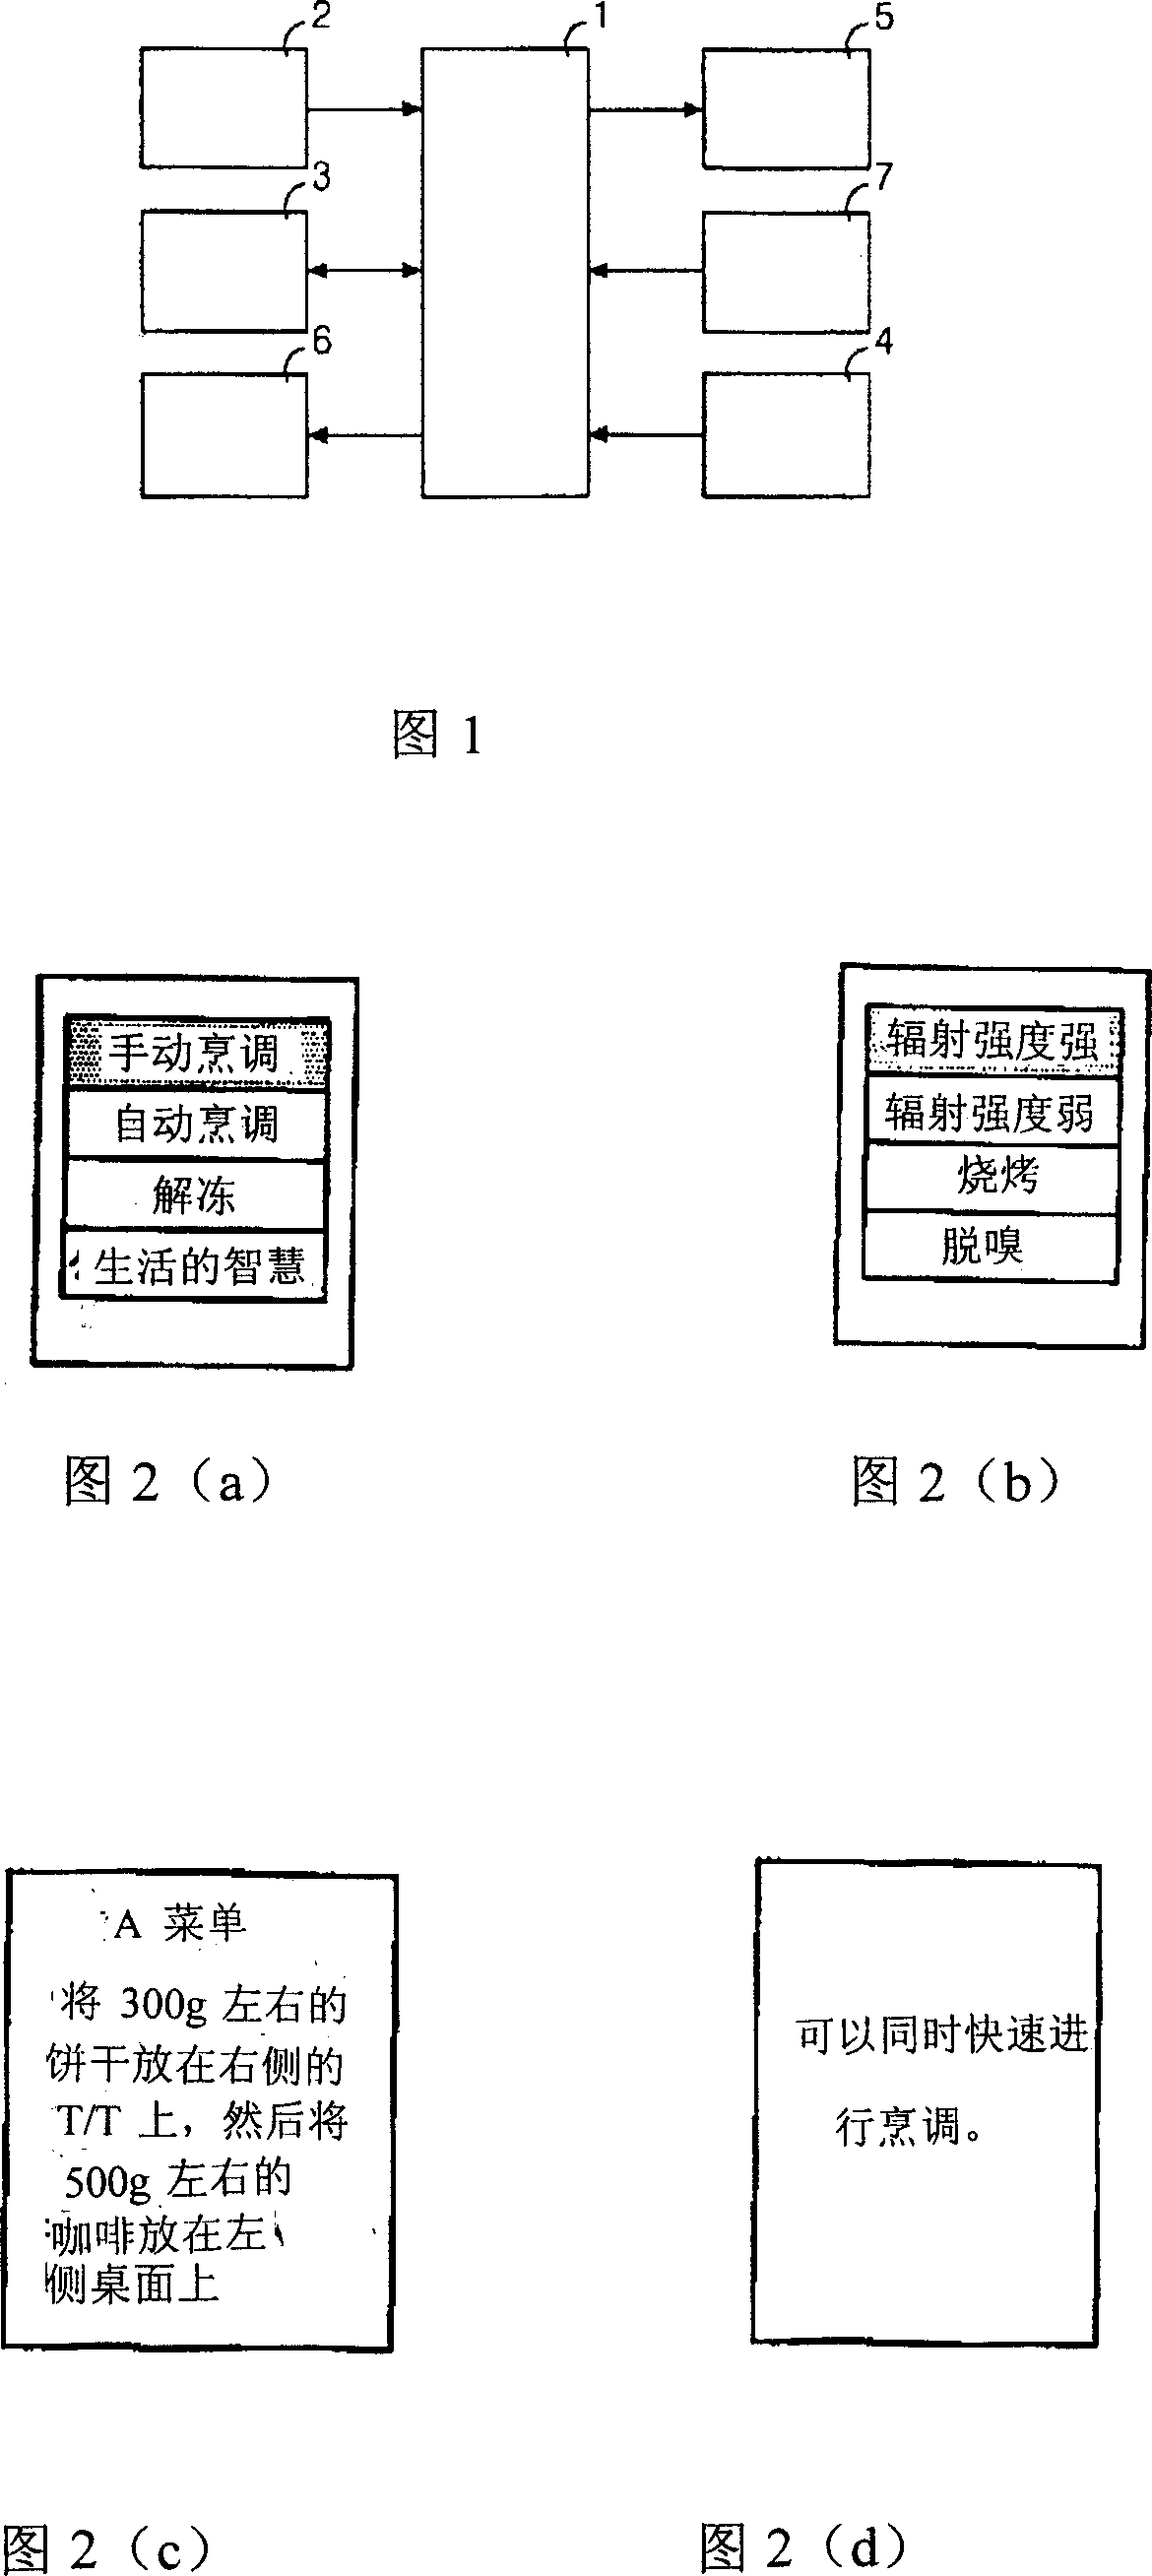 Display control method of microwave oven